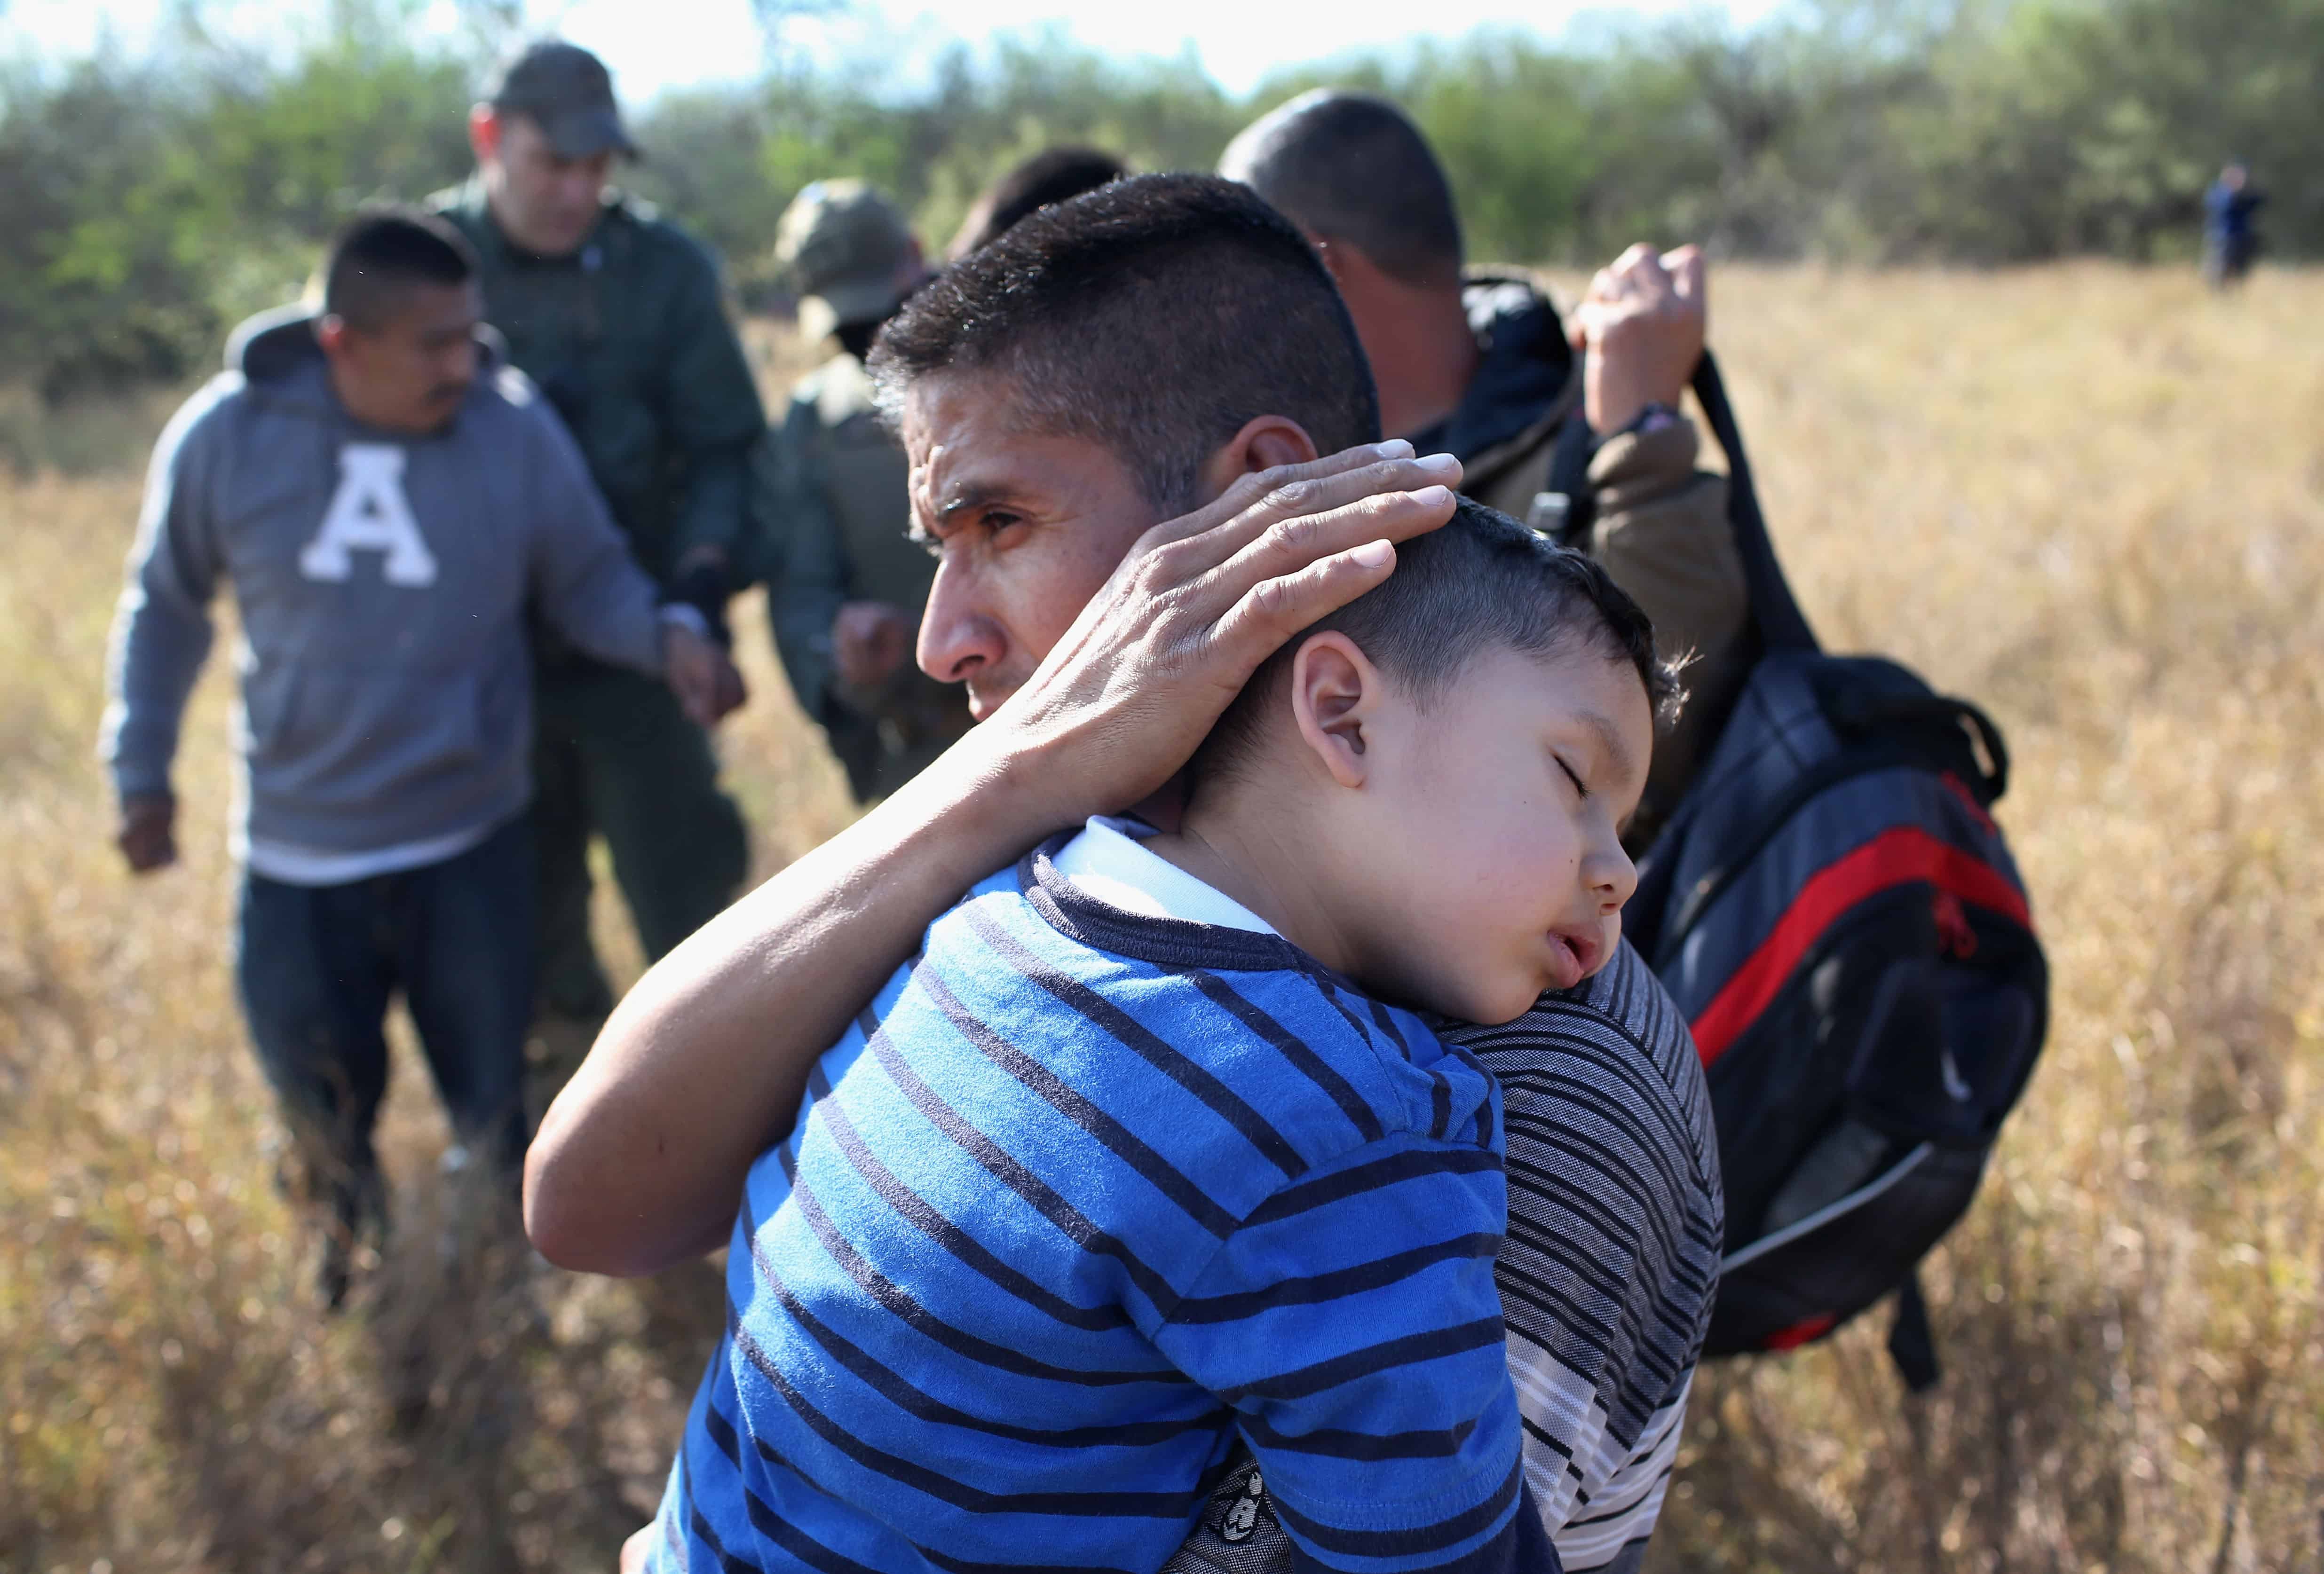 A 3-year-old; child migrants at US border